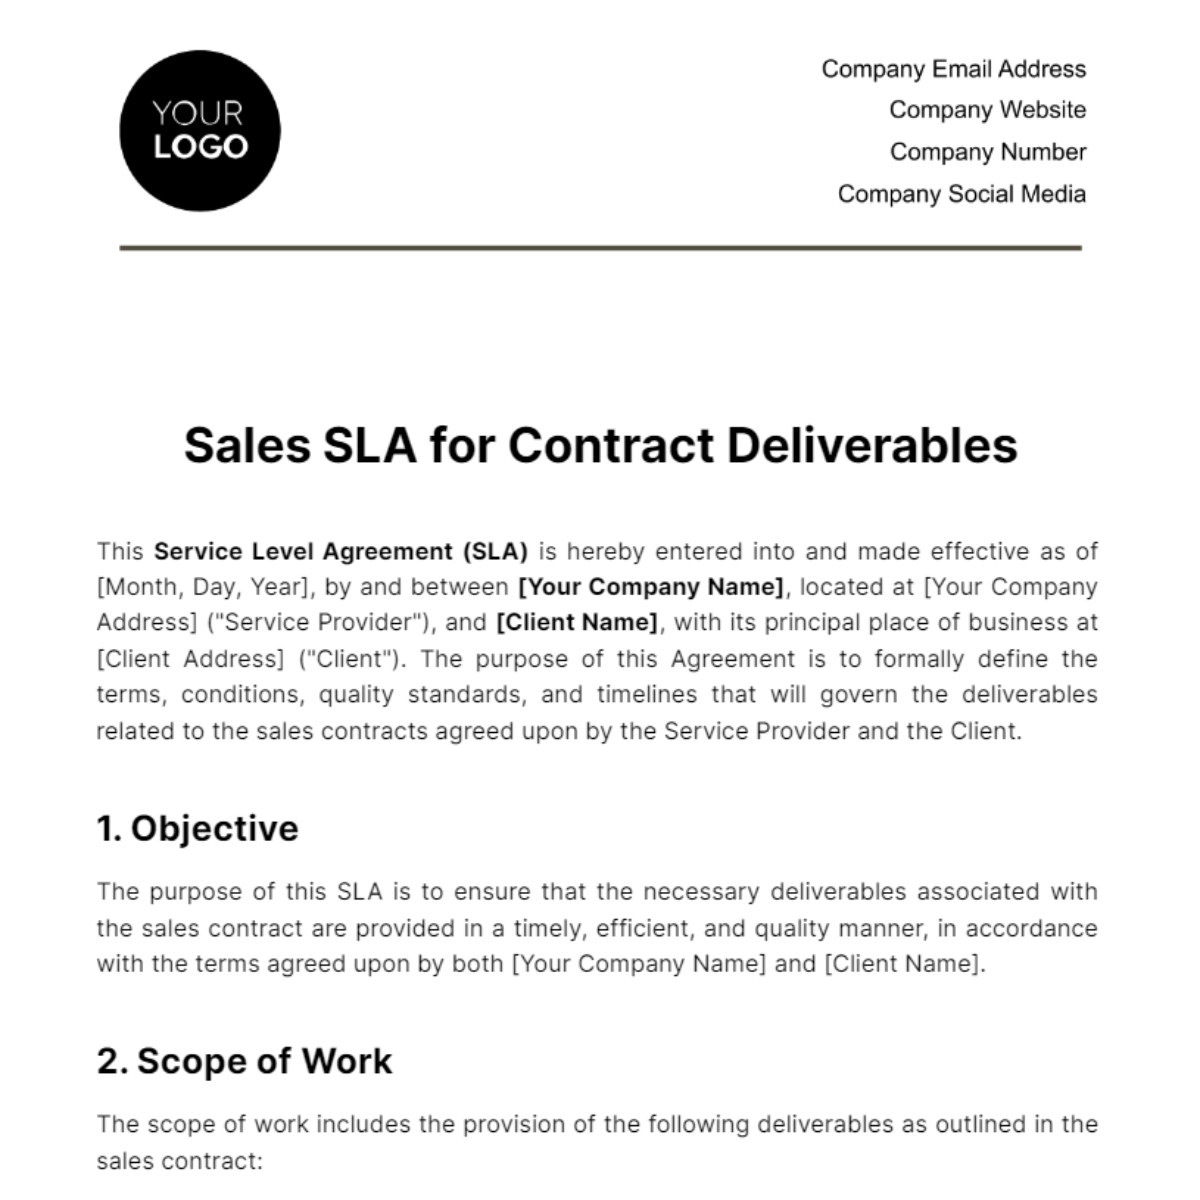 Free Sales SLA for Contract Deliverables Template